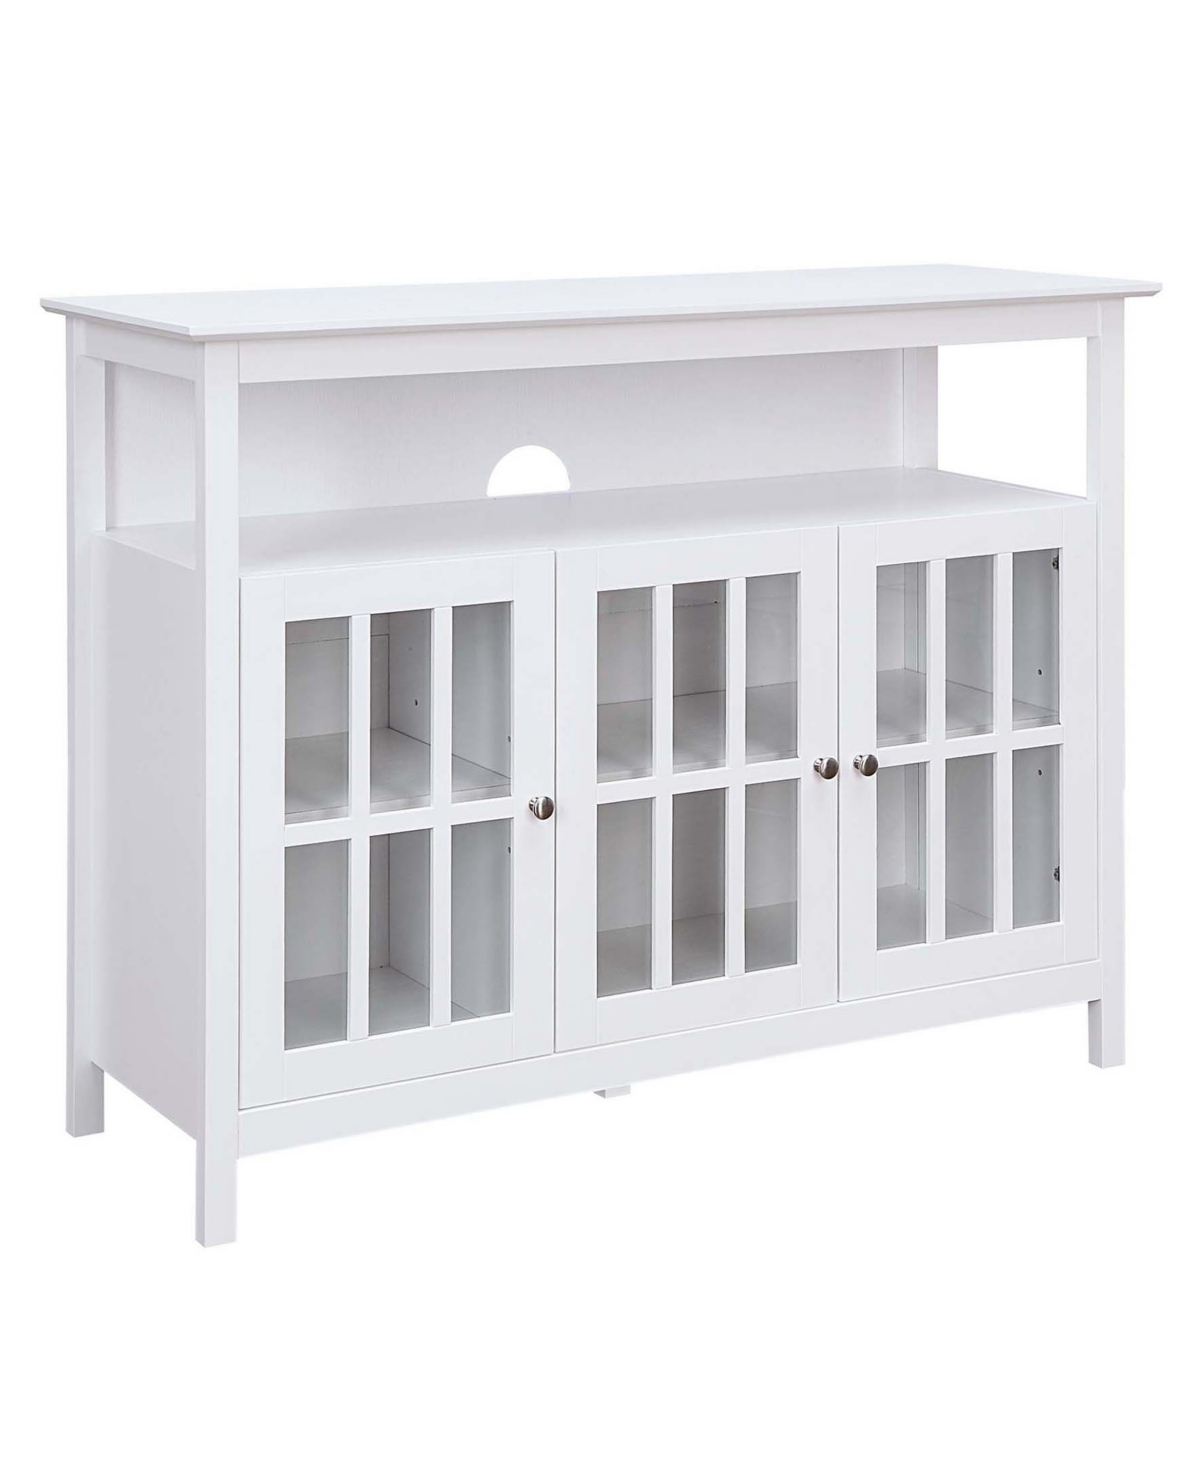 Convenience Concepts 47.75" Big Sur Deluxe Tv Stand With Cabinets And Shelf In White